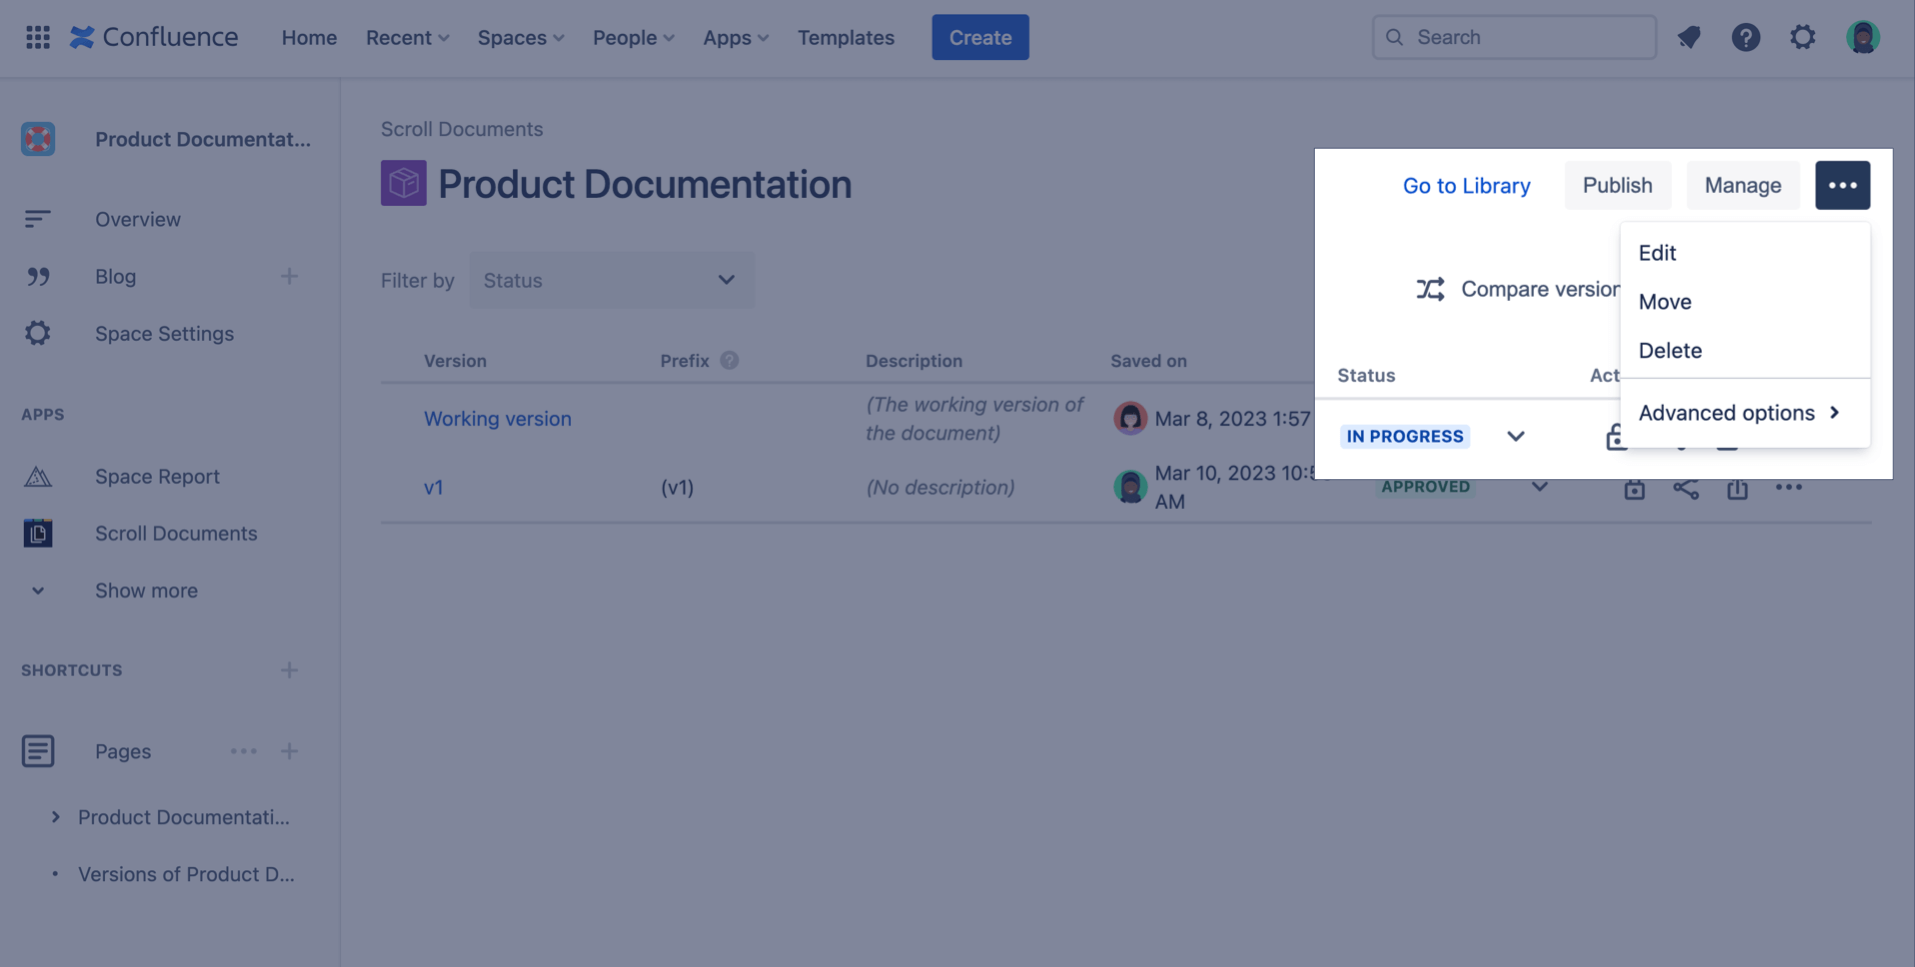 More document actions selected within the Document Manager